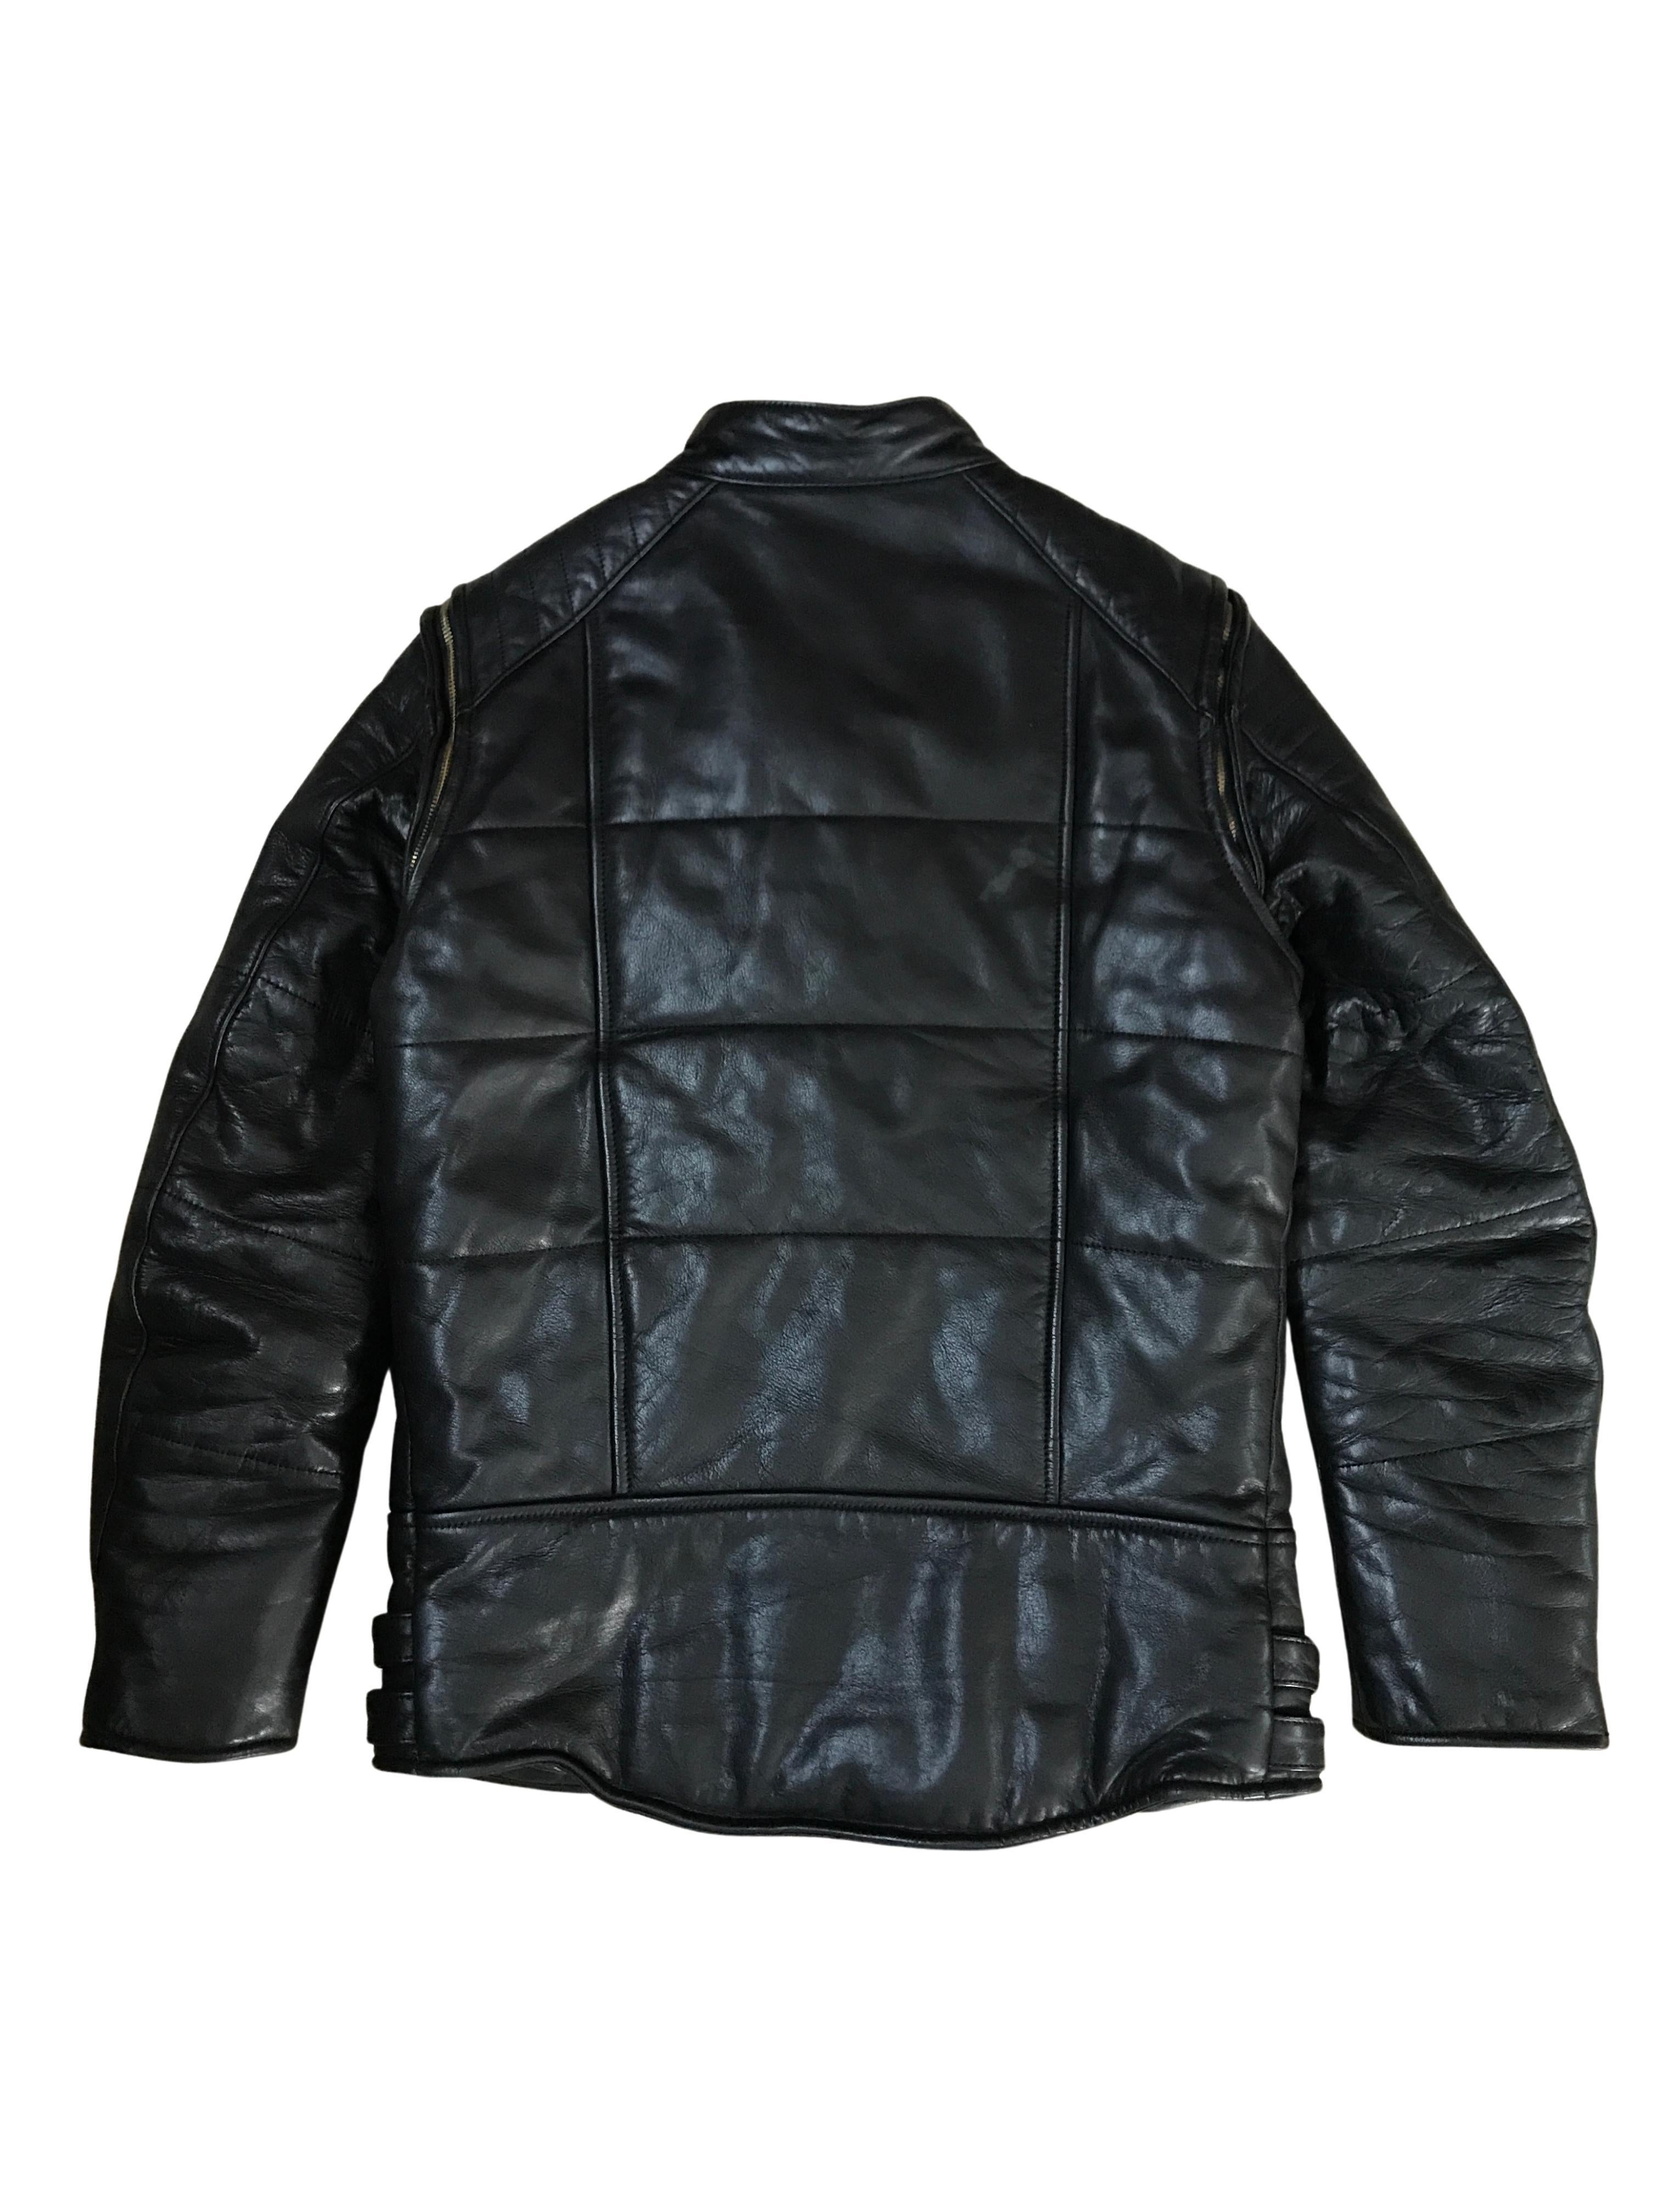 Blackmeans Puffy Riders Jacket w/ Detachable Sleeves In Excellent Condition In Tương Mai Ward, Hoang Mai District